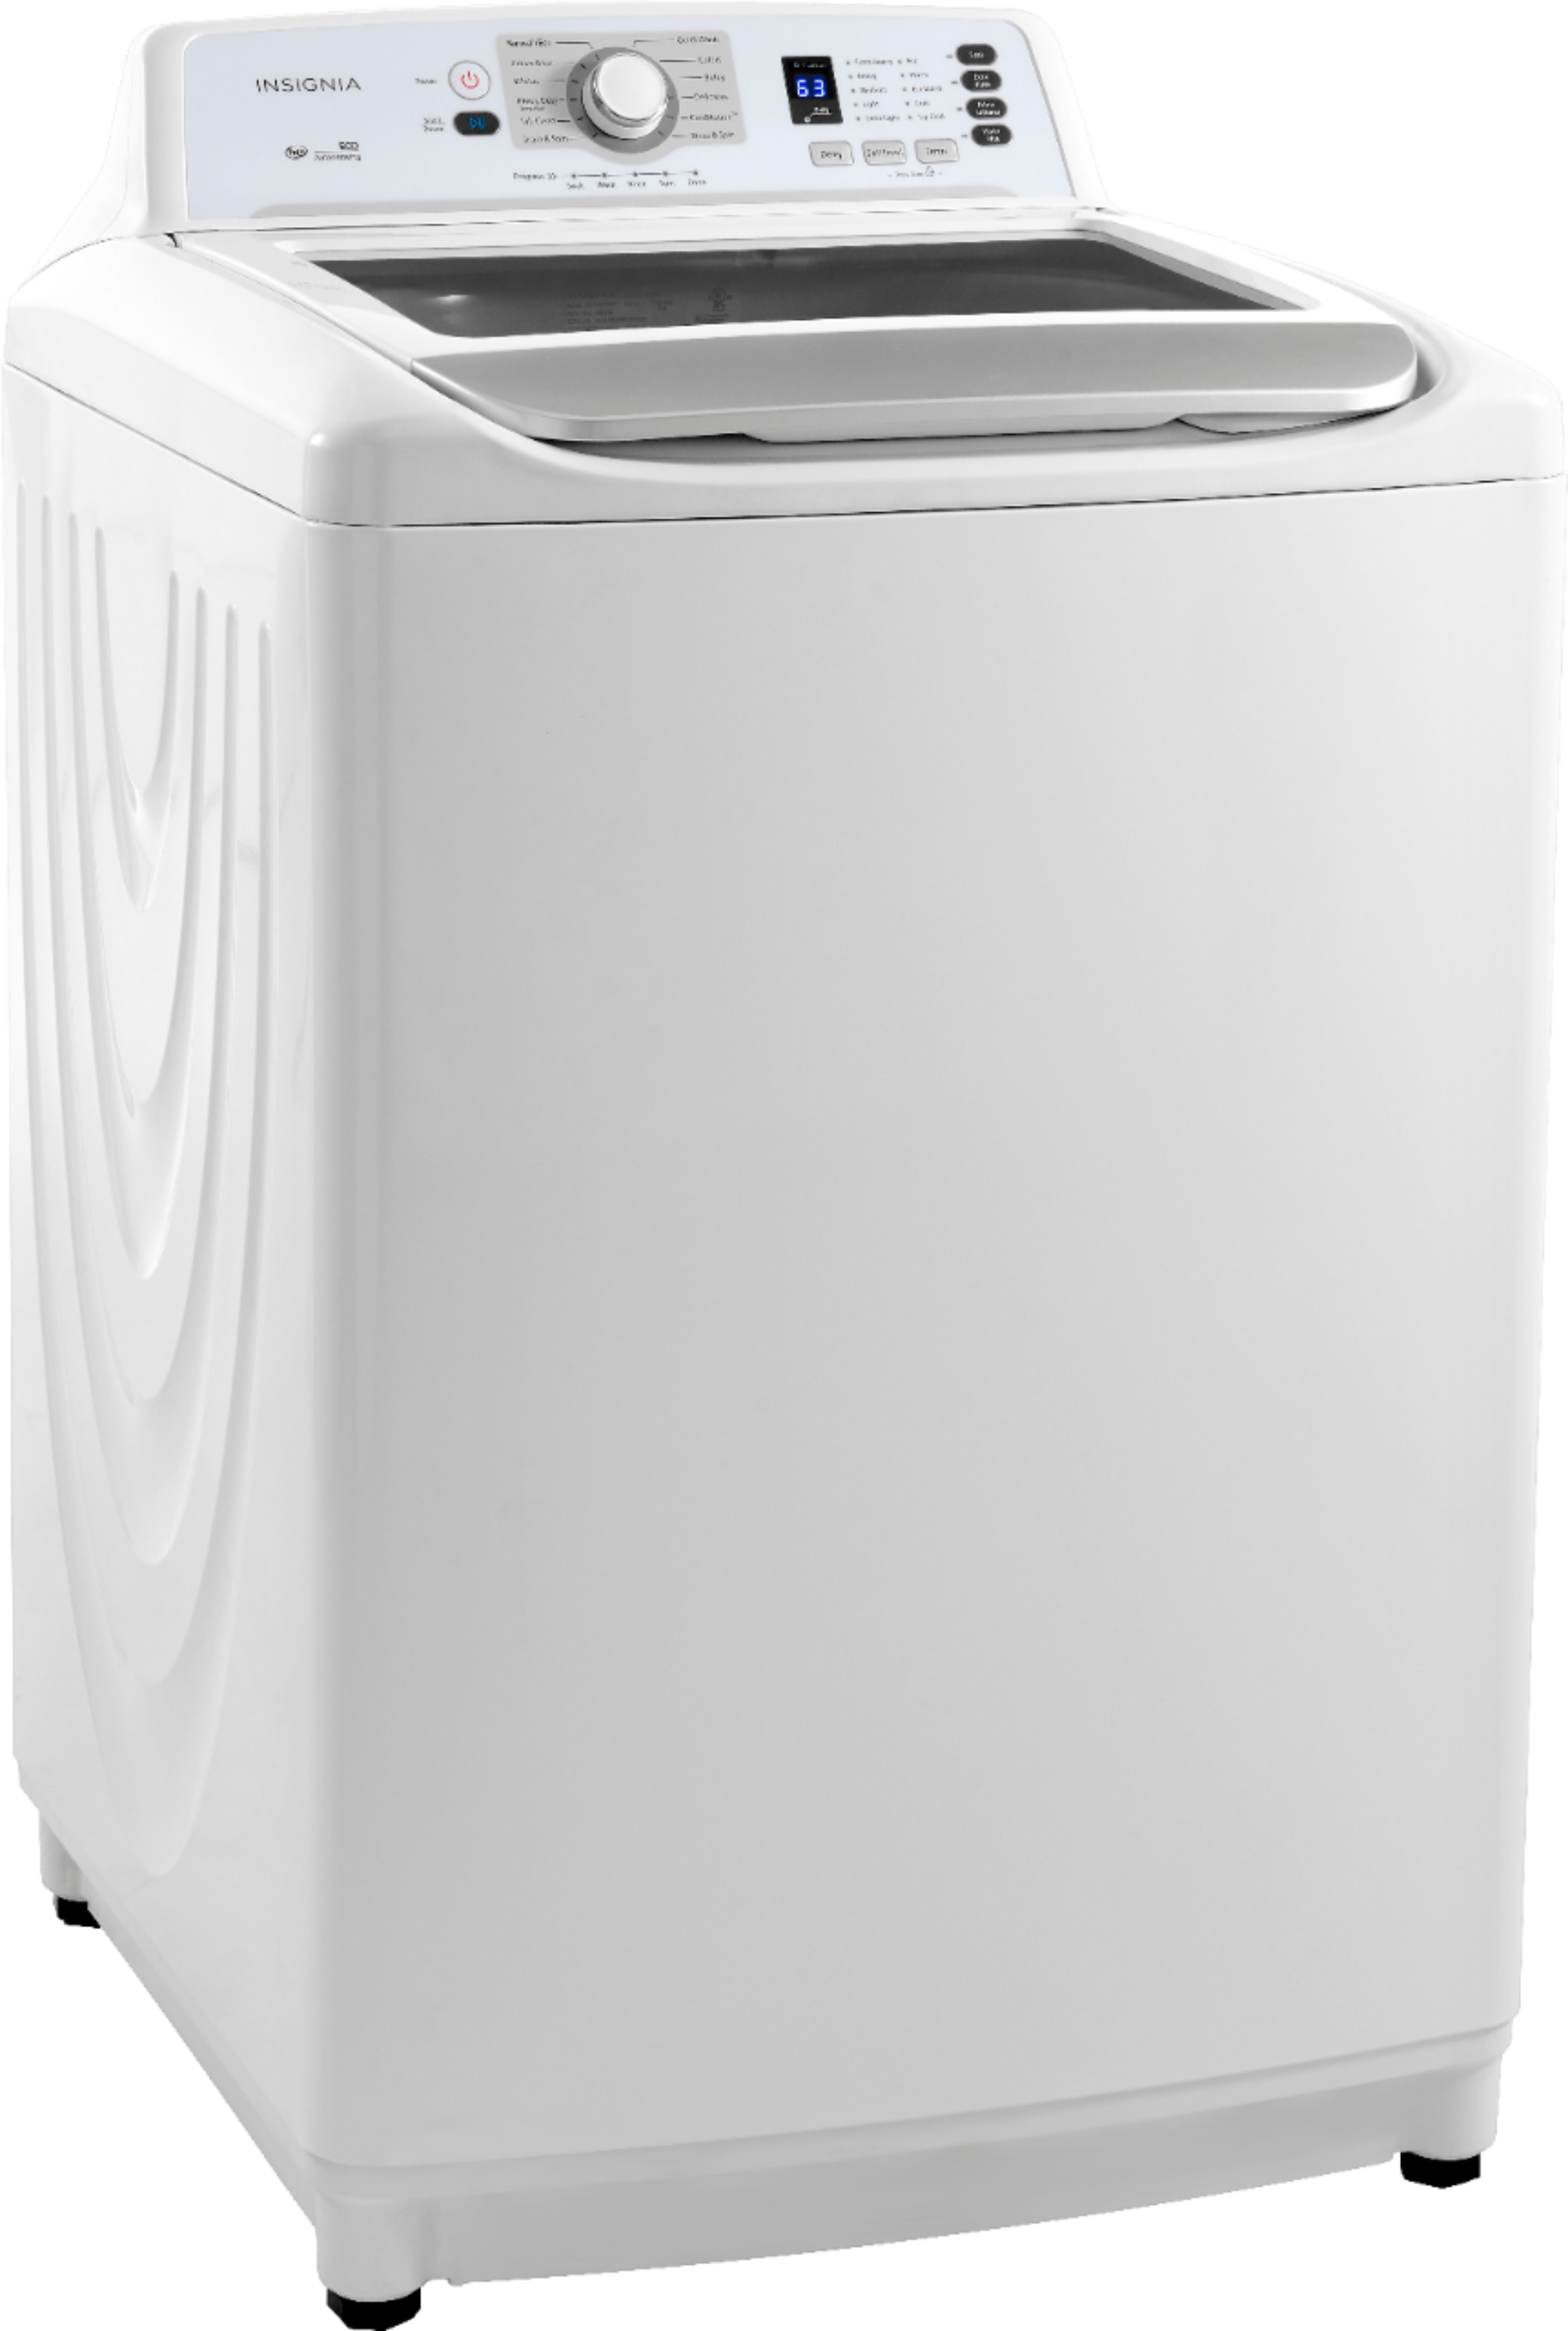 Angle View: Insignia™ - 4.5 Cu. Ft. High Efficiency Top Load Washer with ColdMotion Technology - White